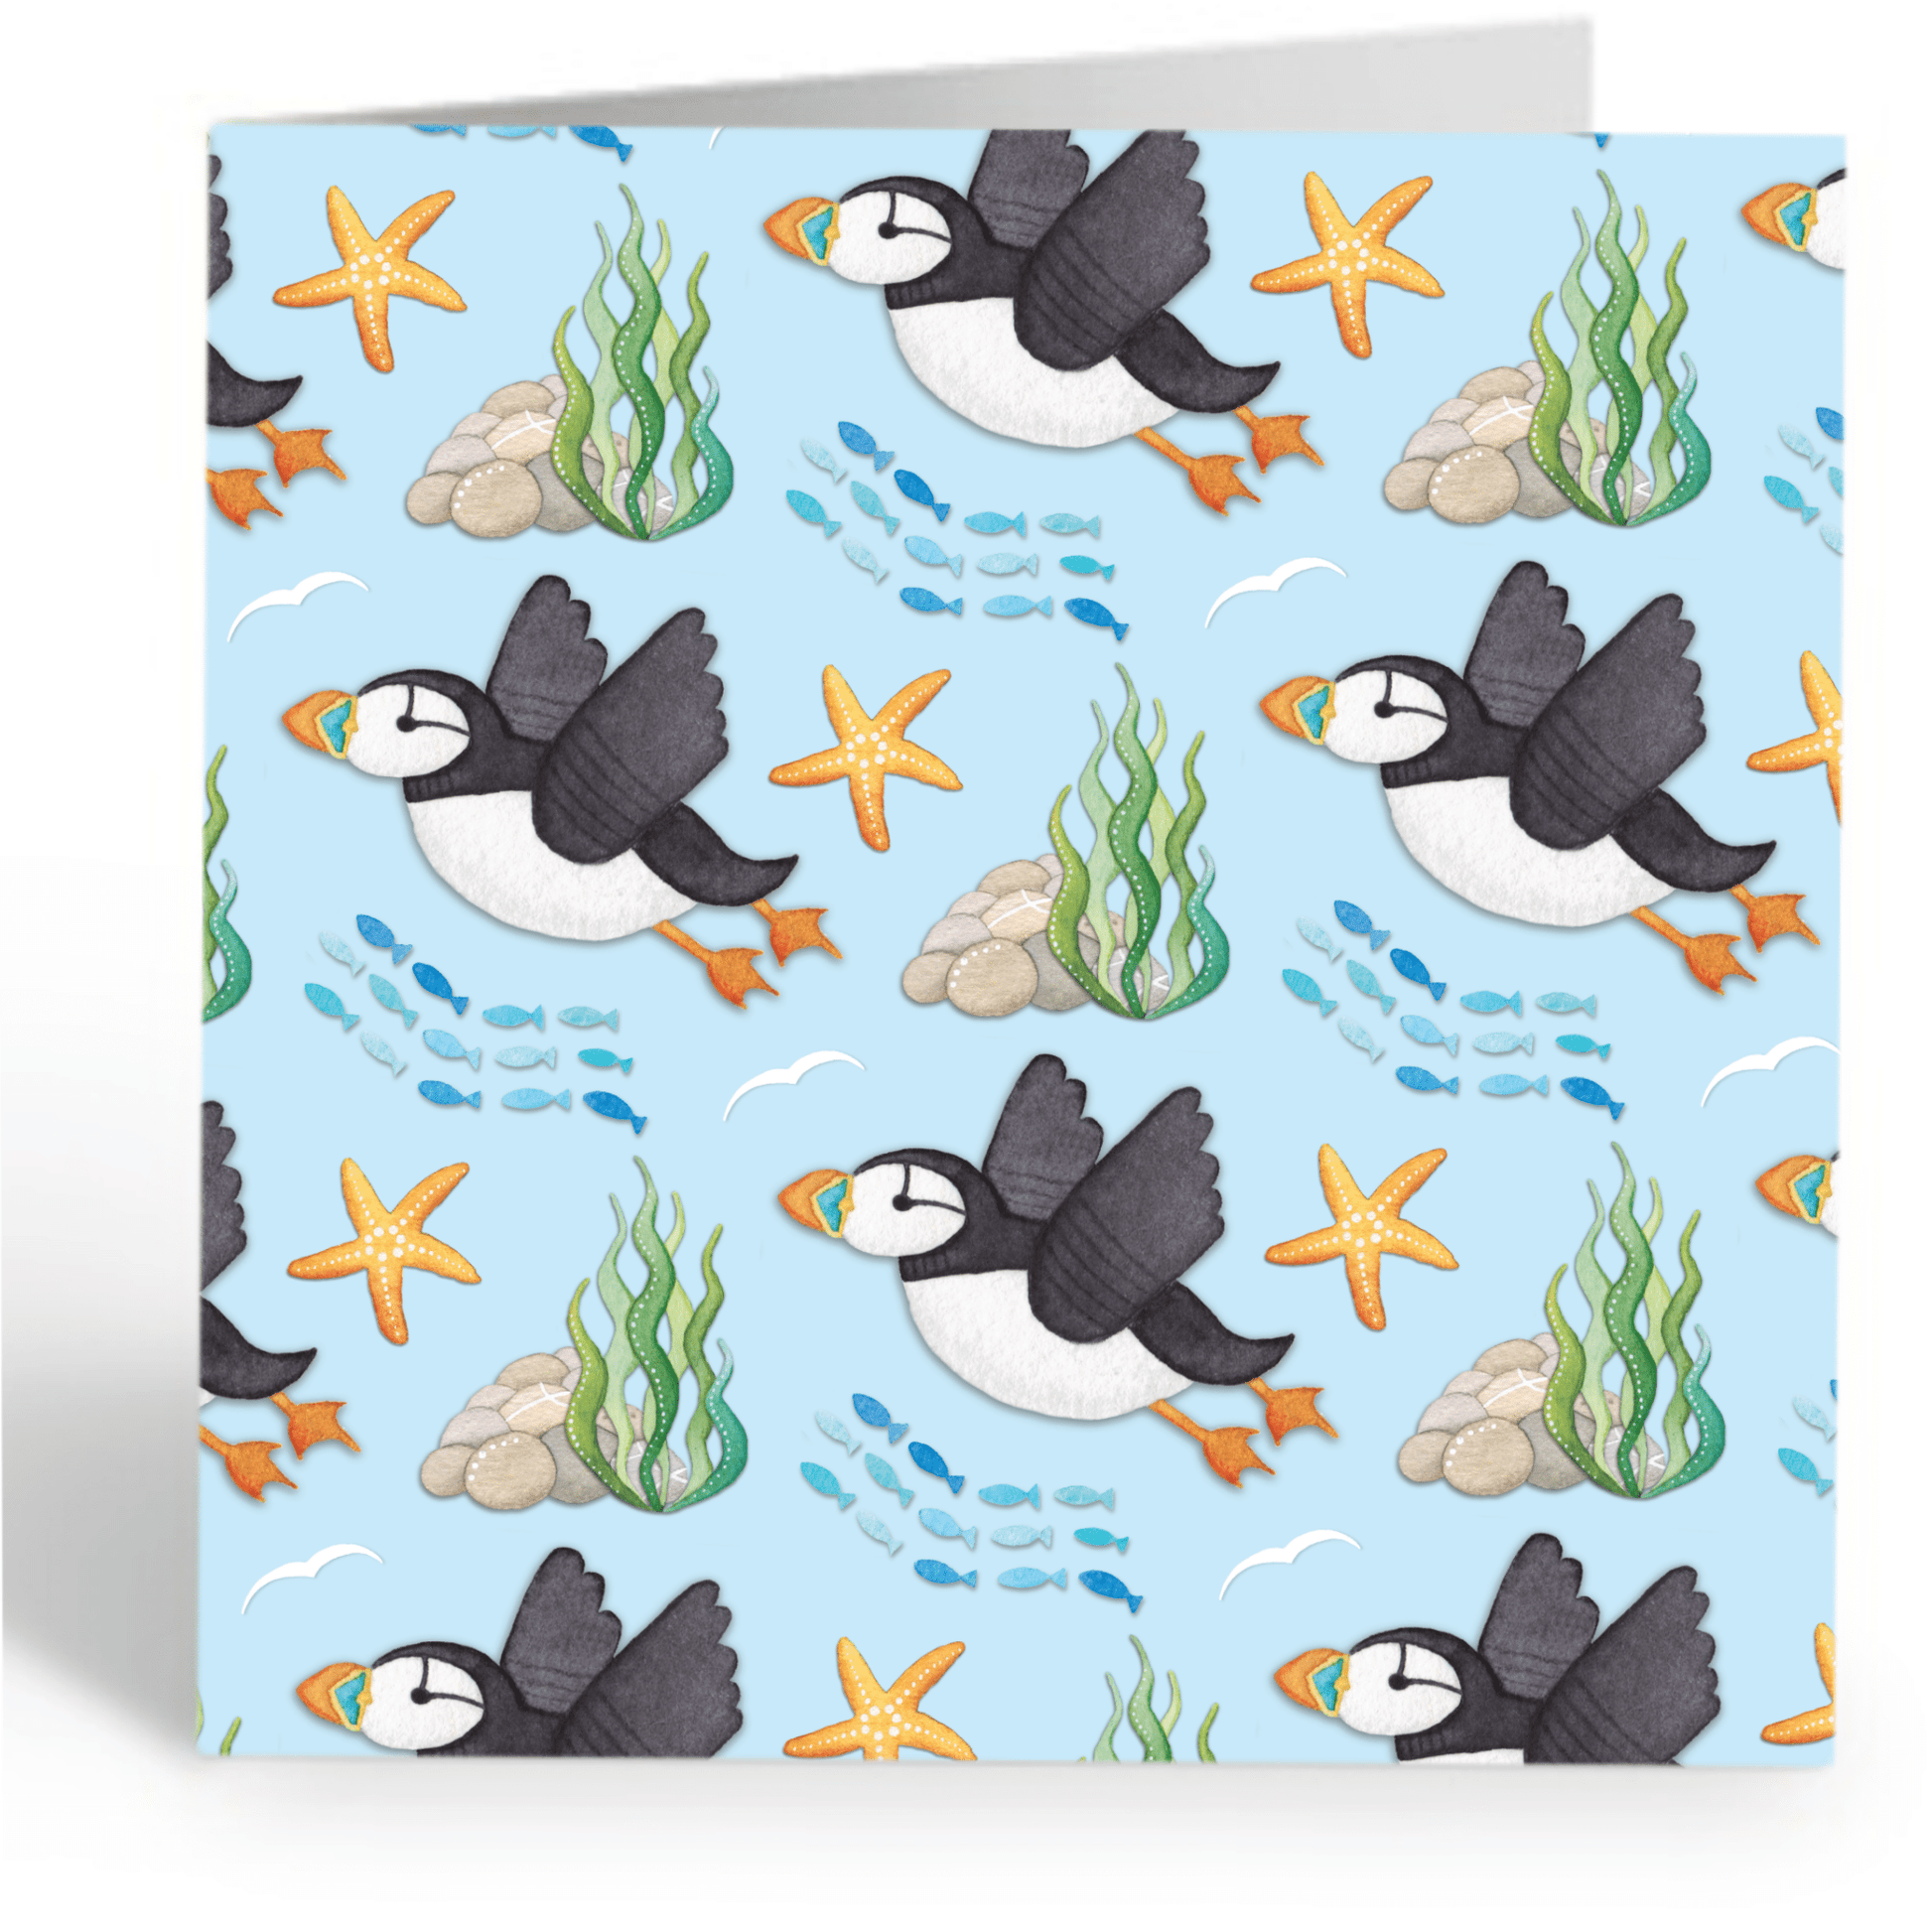 Greetings Card - Flying Puffins Pattern - Seaside Watercolour Painting - East Neuk Beach Crafts